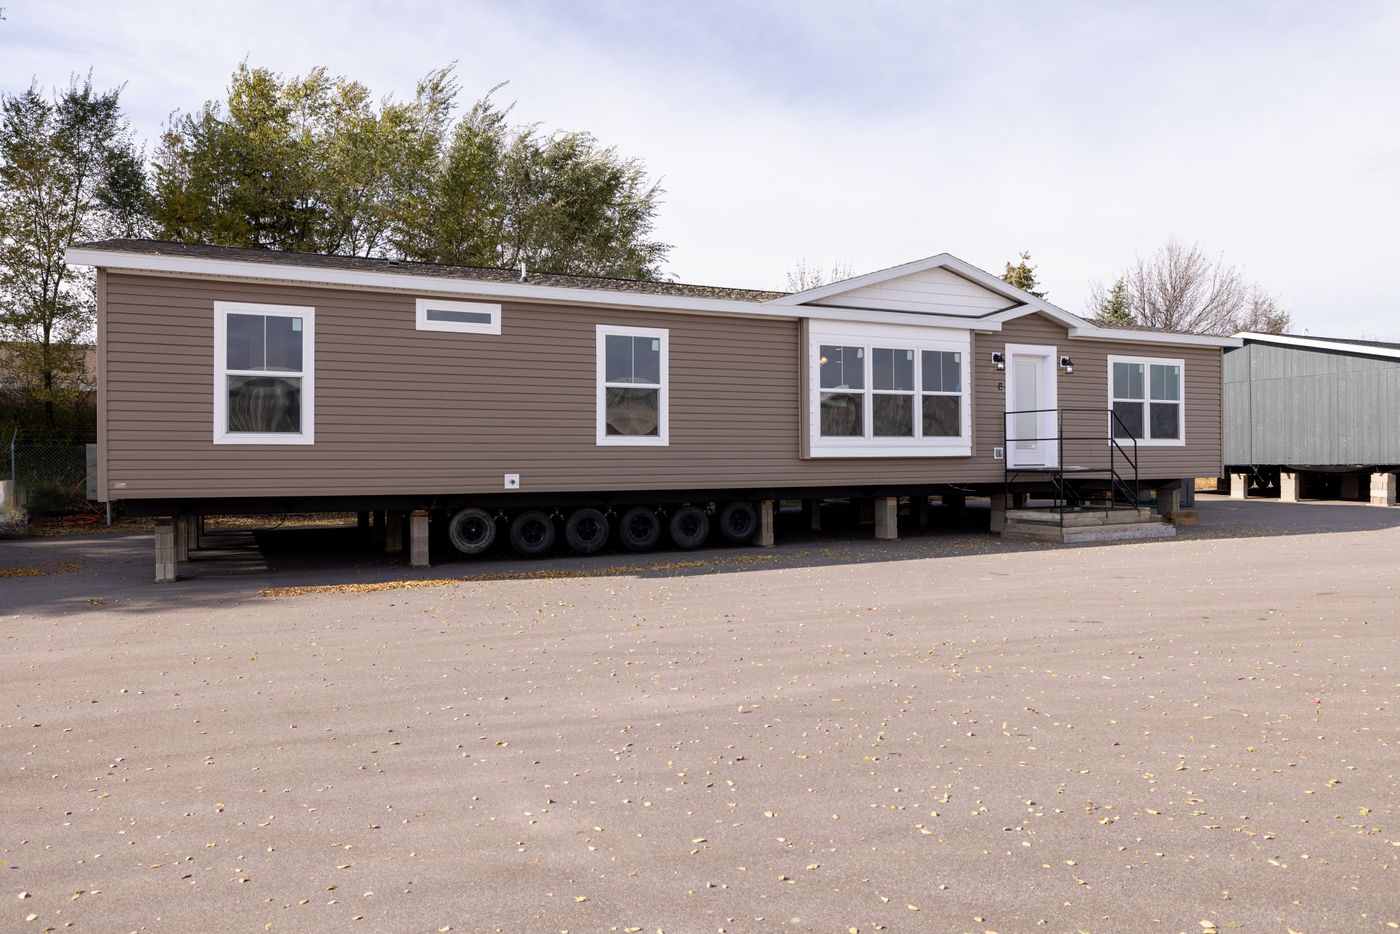 The LEGACY 327 Exterior. This Manufactured Mobile Home features 3 bedrooms and 2 baths.